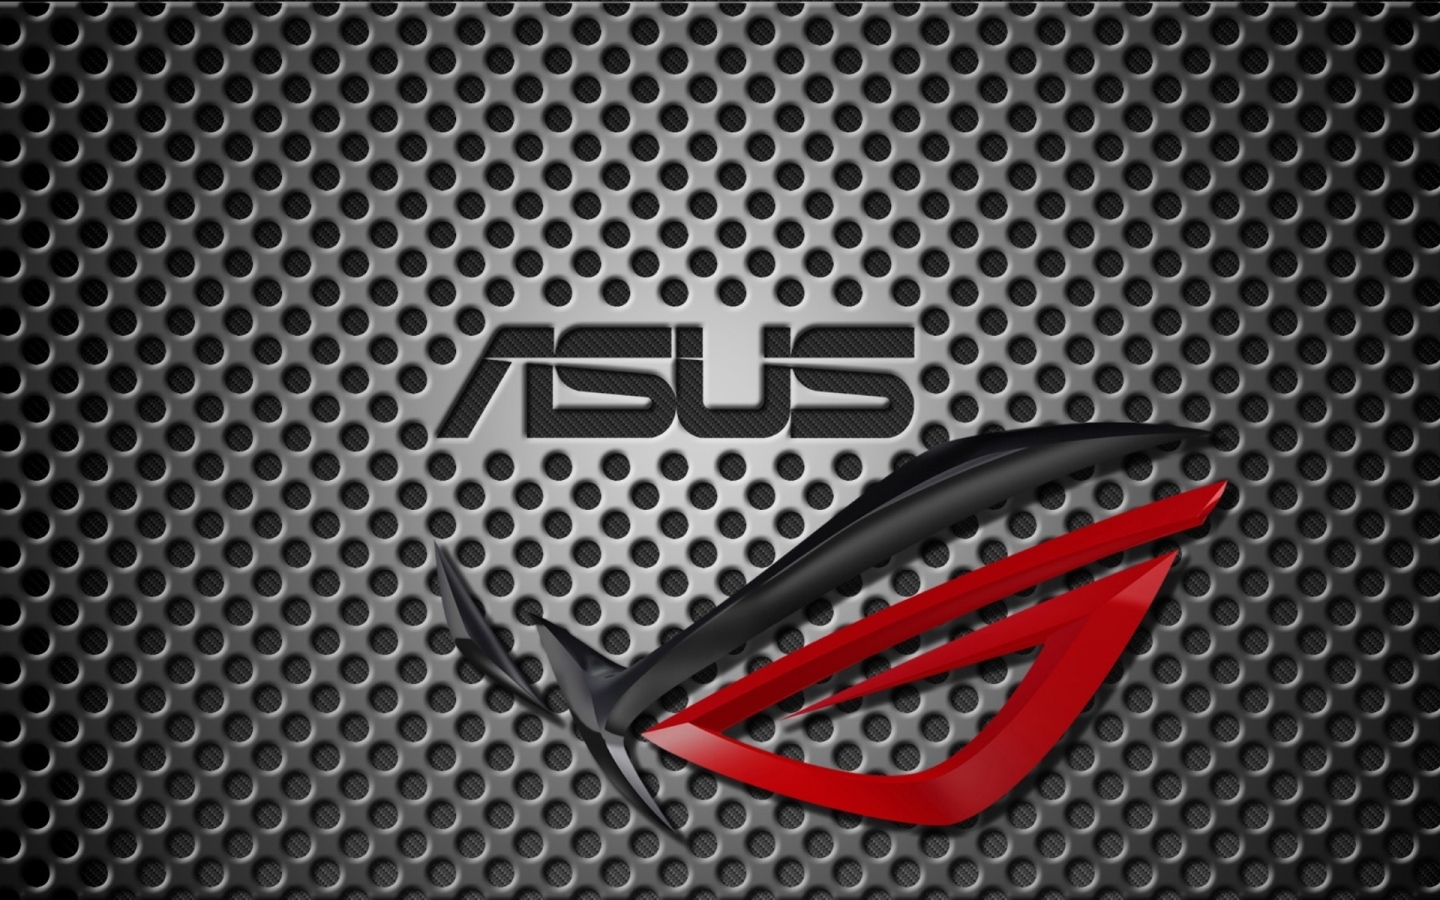 Asus Computer for 1440 x 900 widescreen resolution